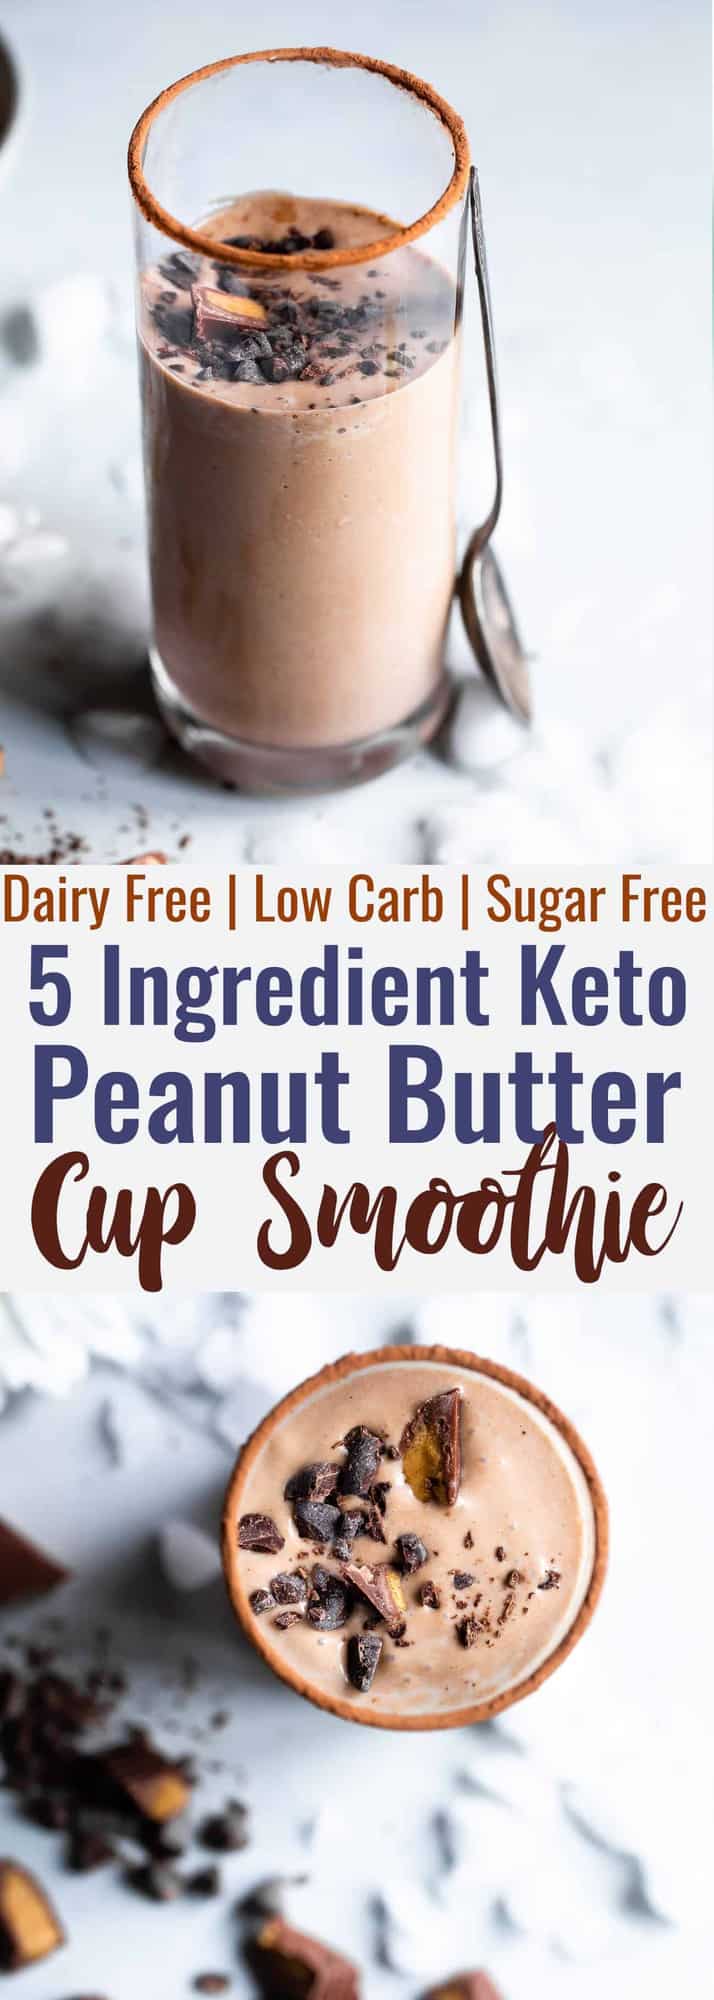 Peanut butter keto low carb smoothie with almond milk